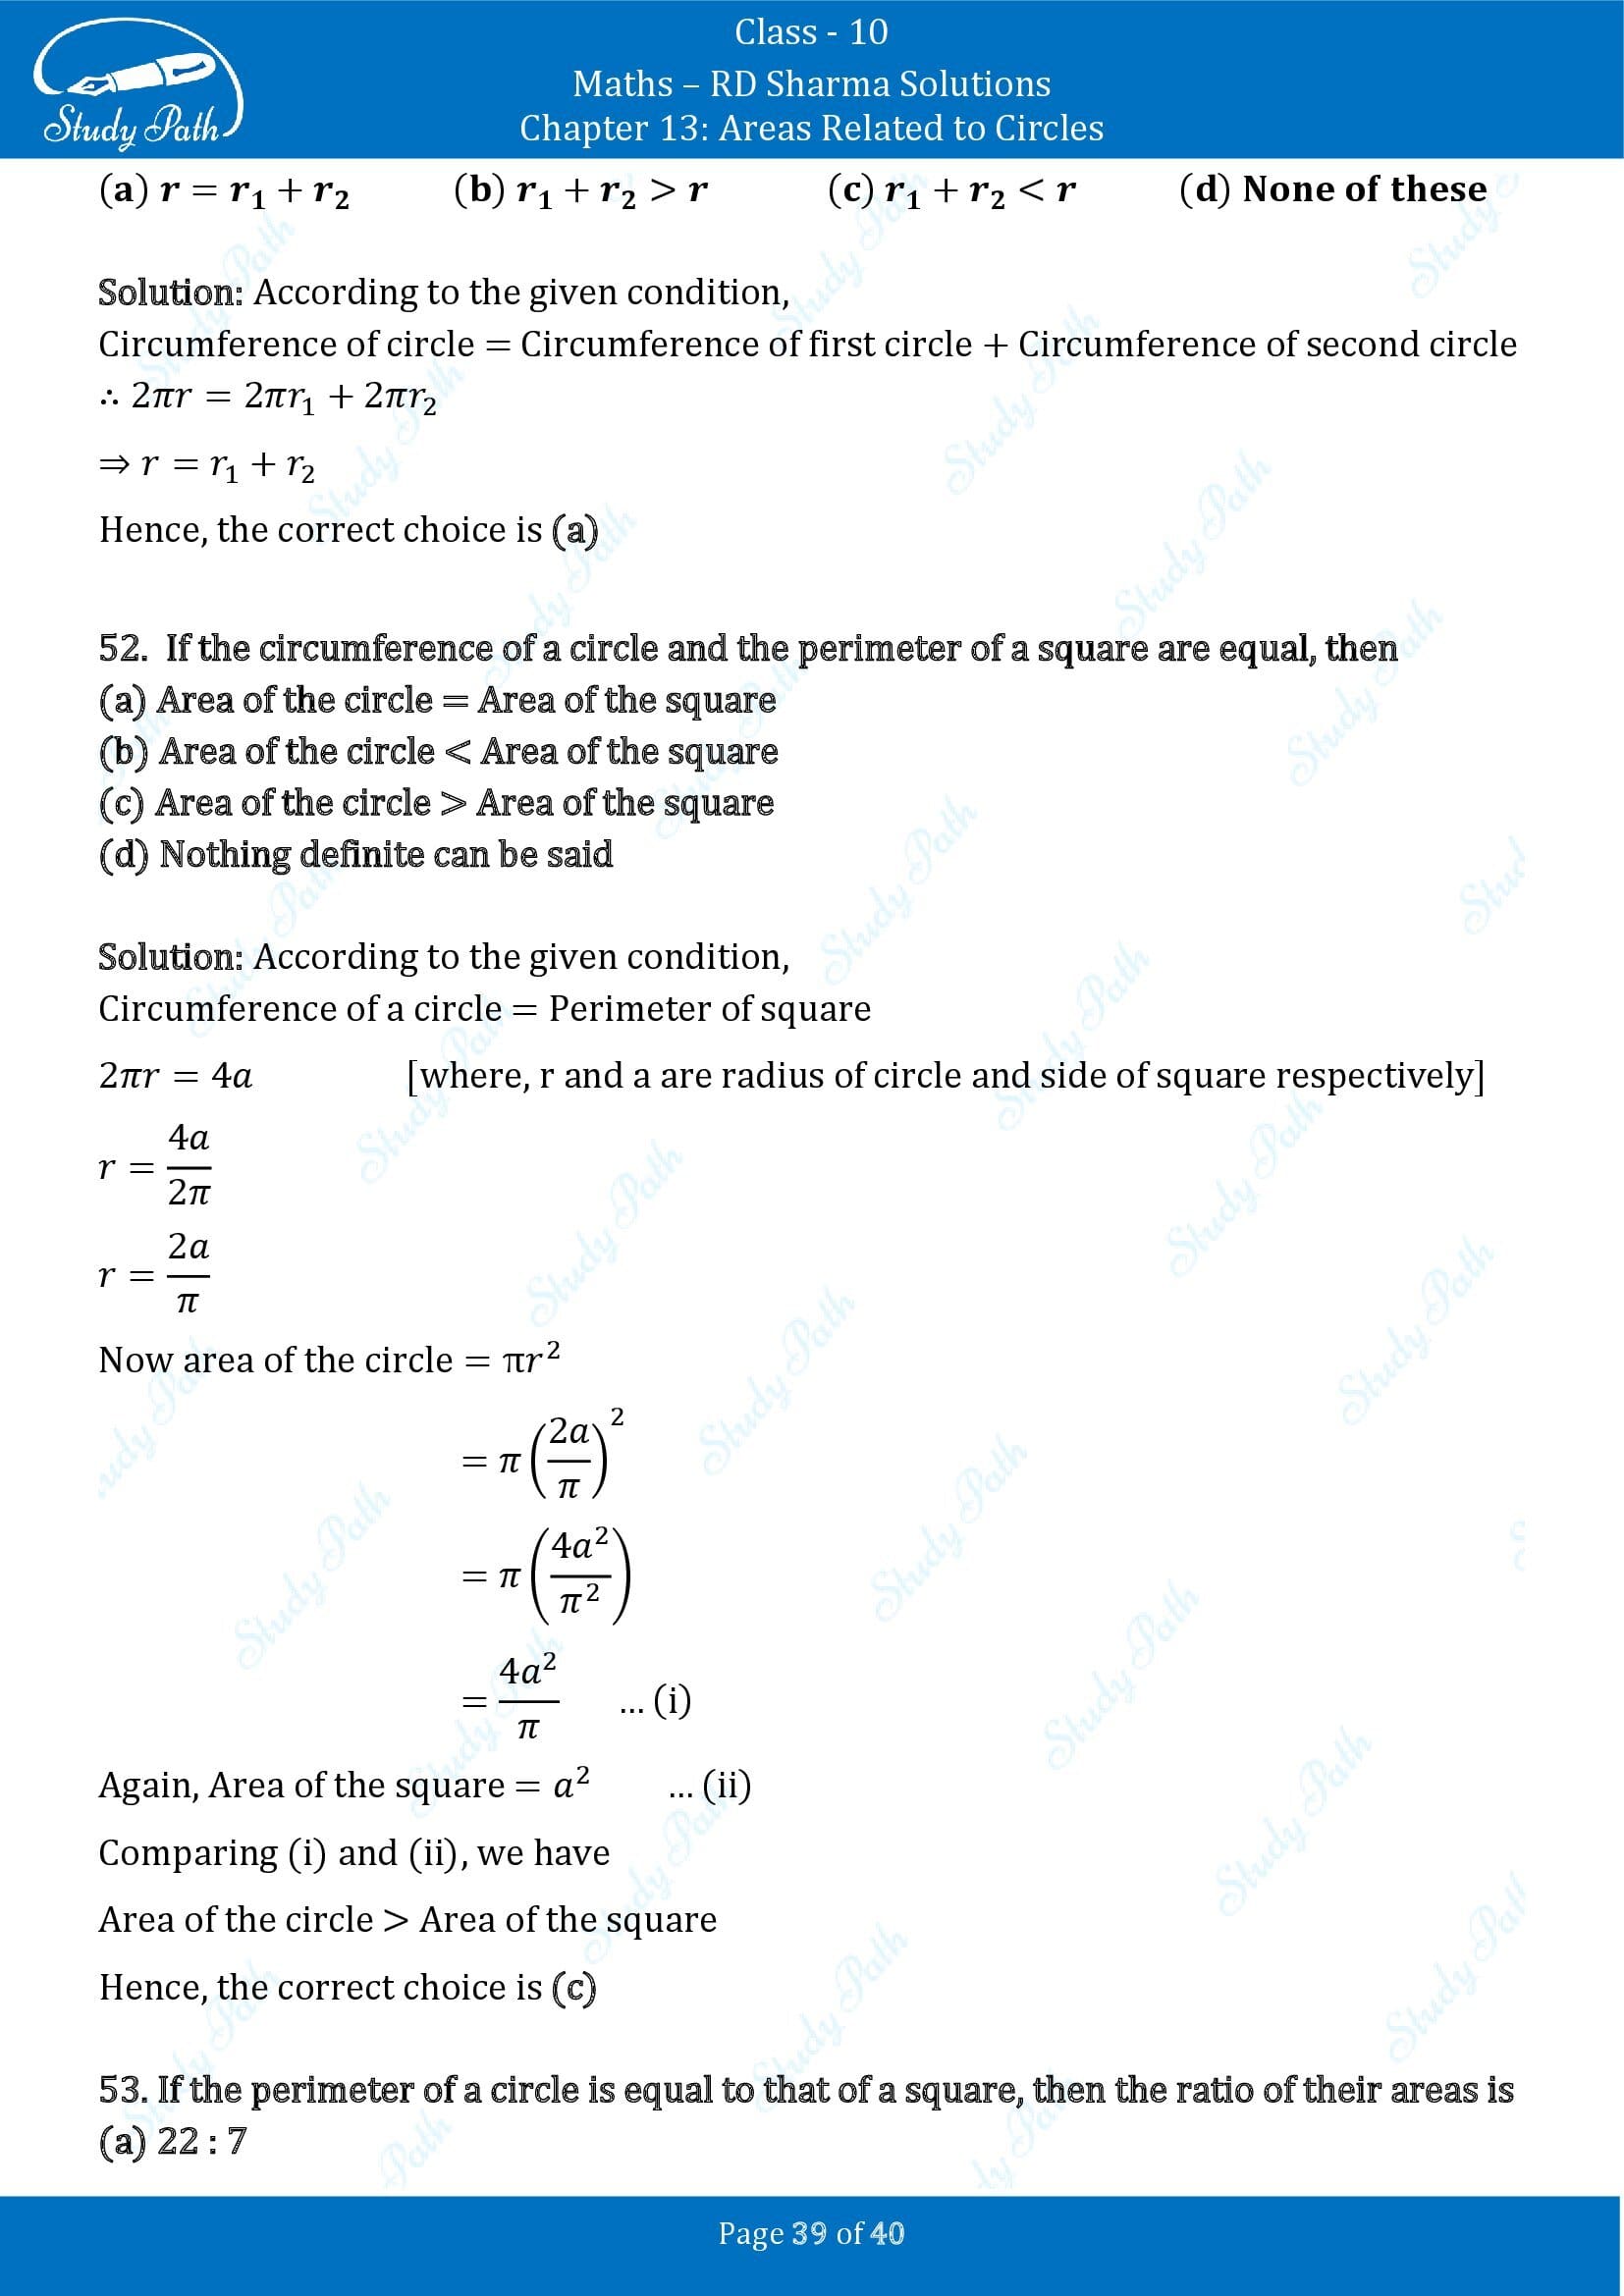 RD Sharma Solutions Class 10 Chapter 13 Areas Related to Circles Multiple Choice Question MCQs 00039